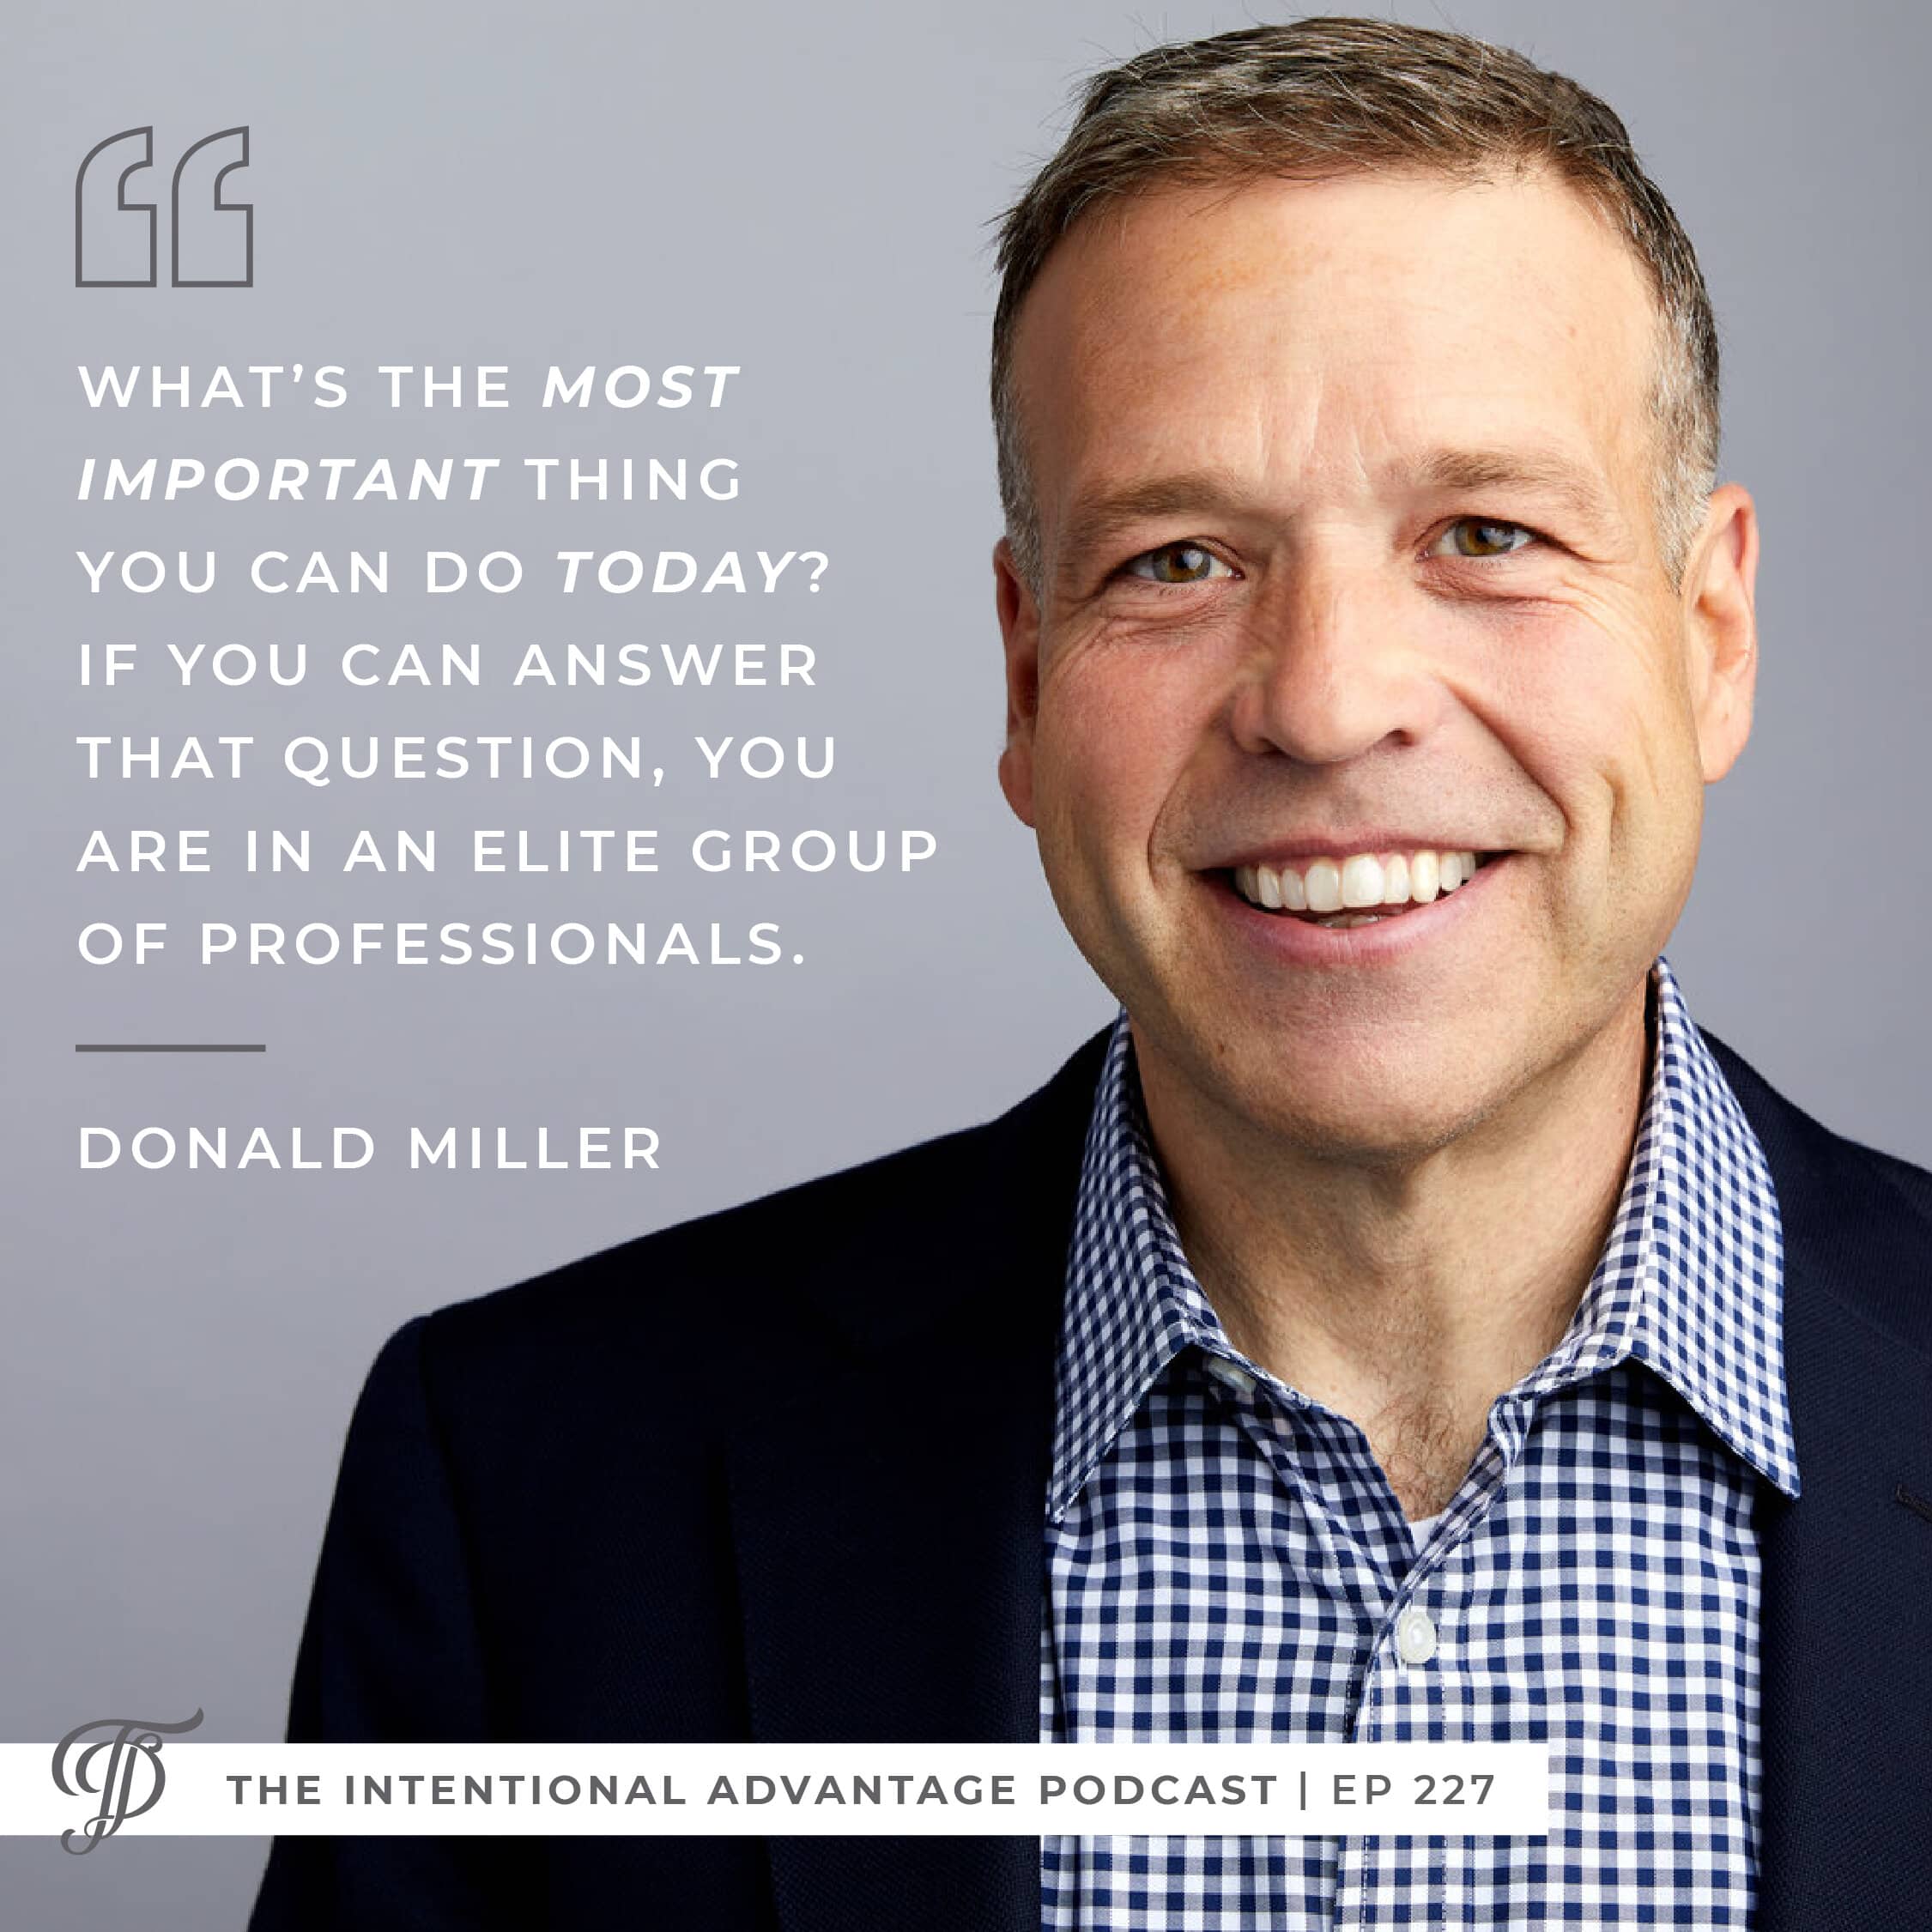 Donald Miller podcast interview on The Intentional Advantage